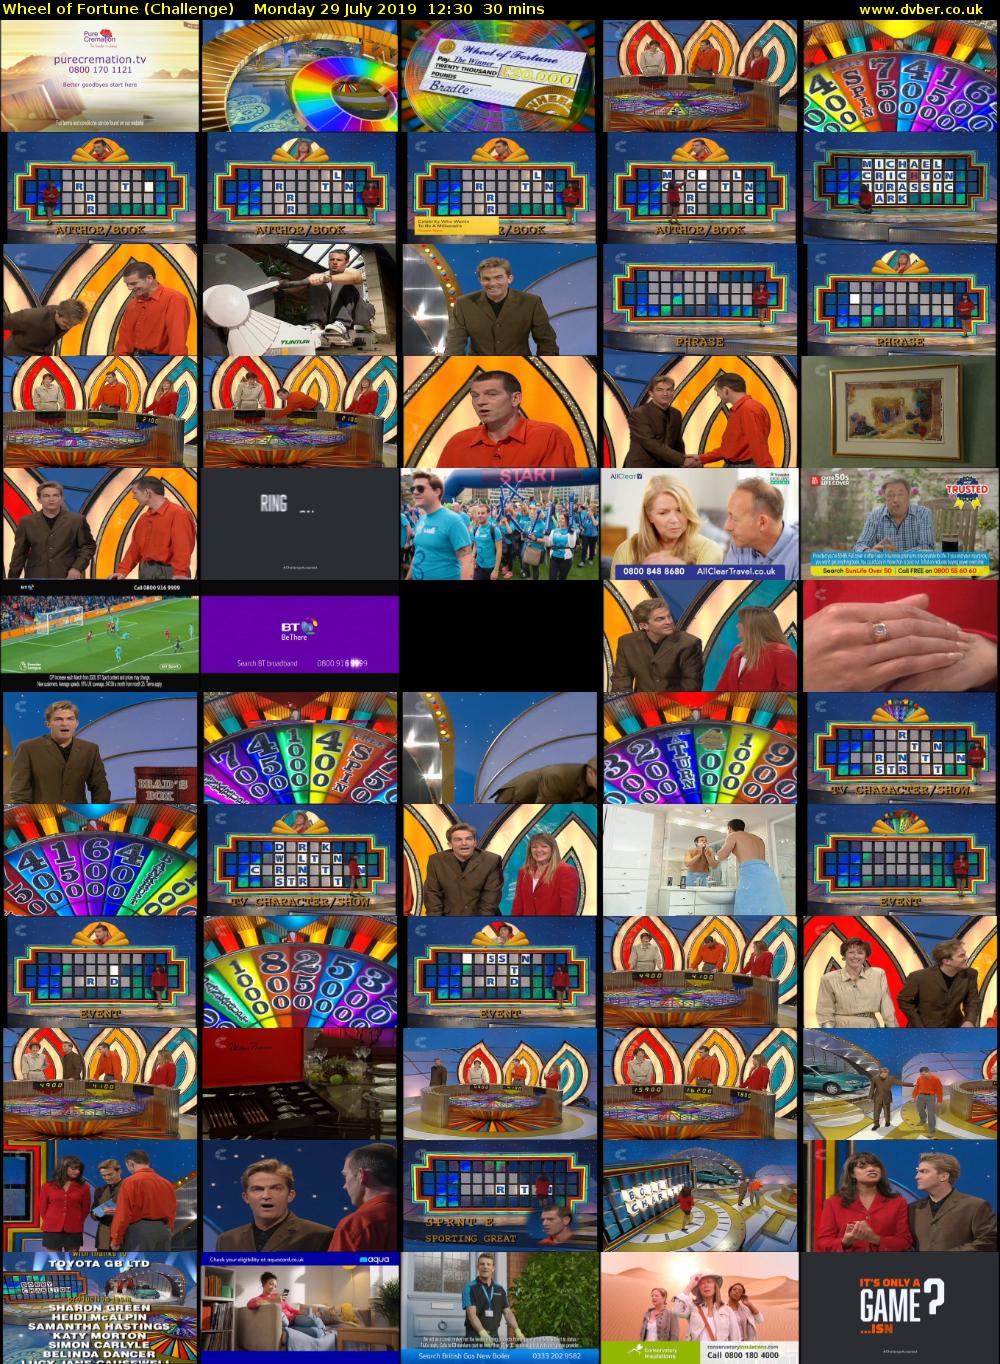 Wheel of Fortune (Challenge) Monday 29 July 2019 12:30 - 13:00